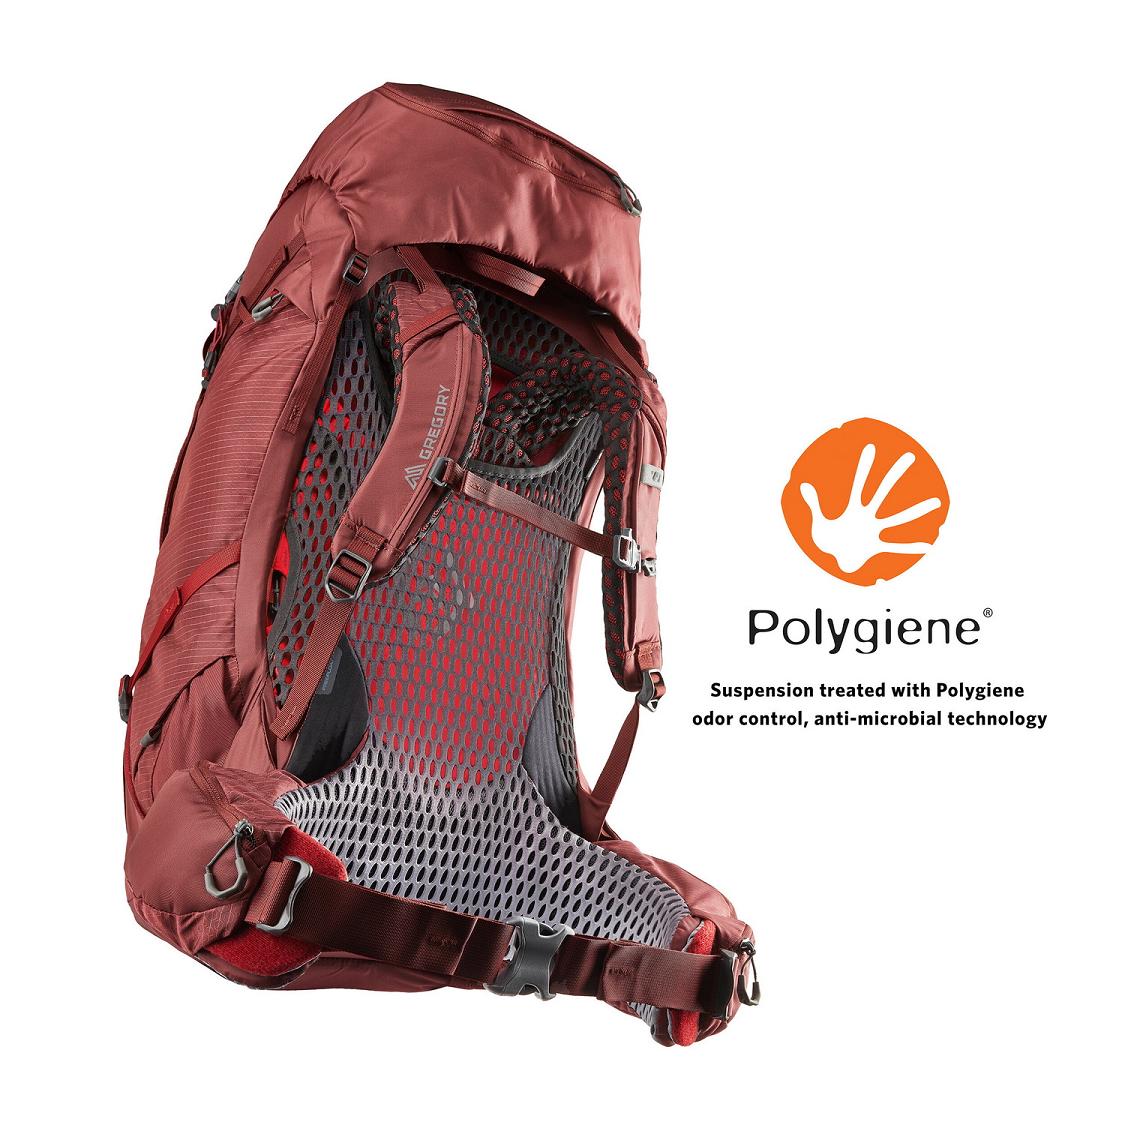 Women Gregory Kalmia 50 Backpacking Red Sale EJYX14968